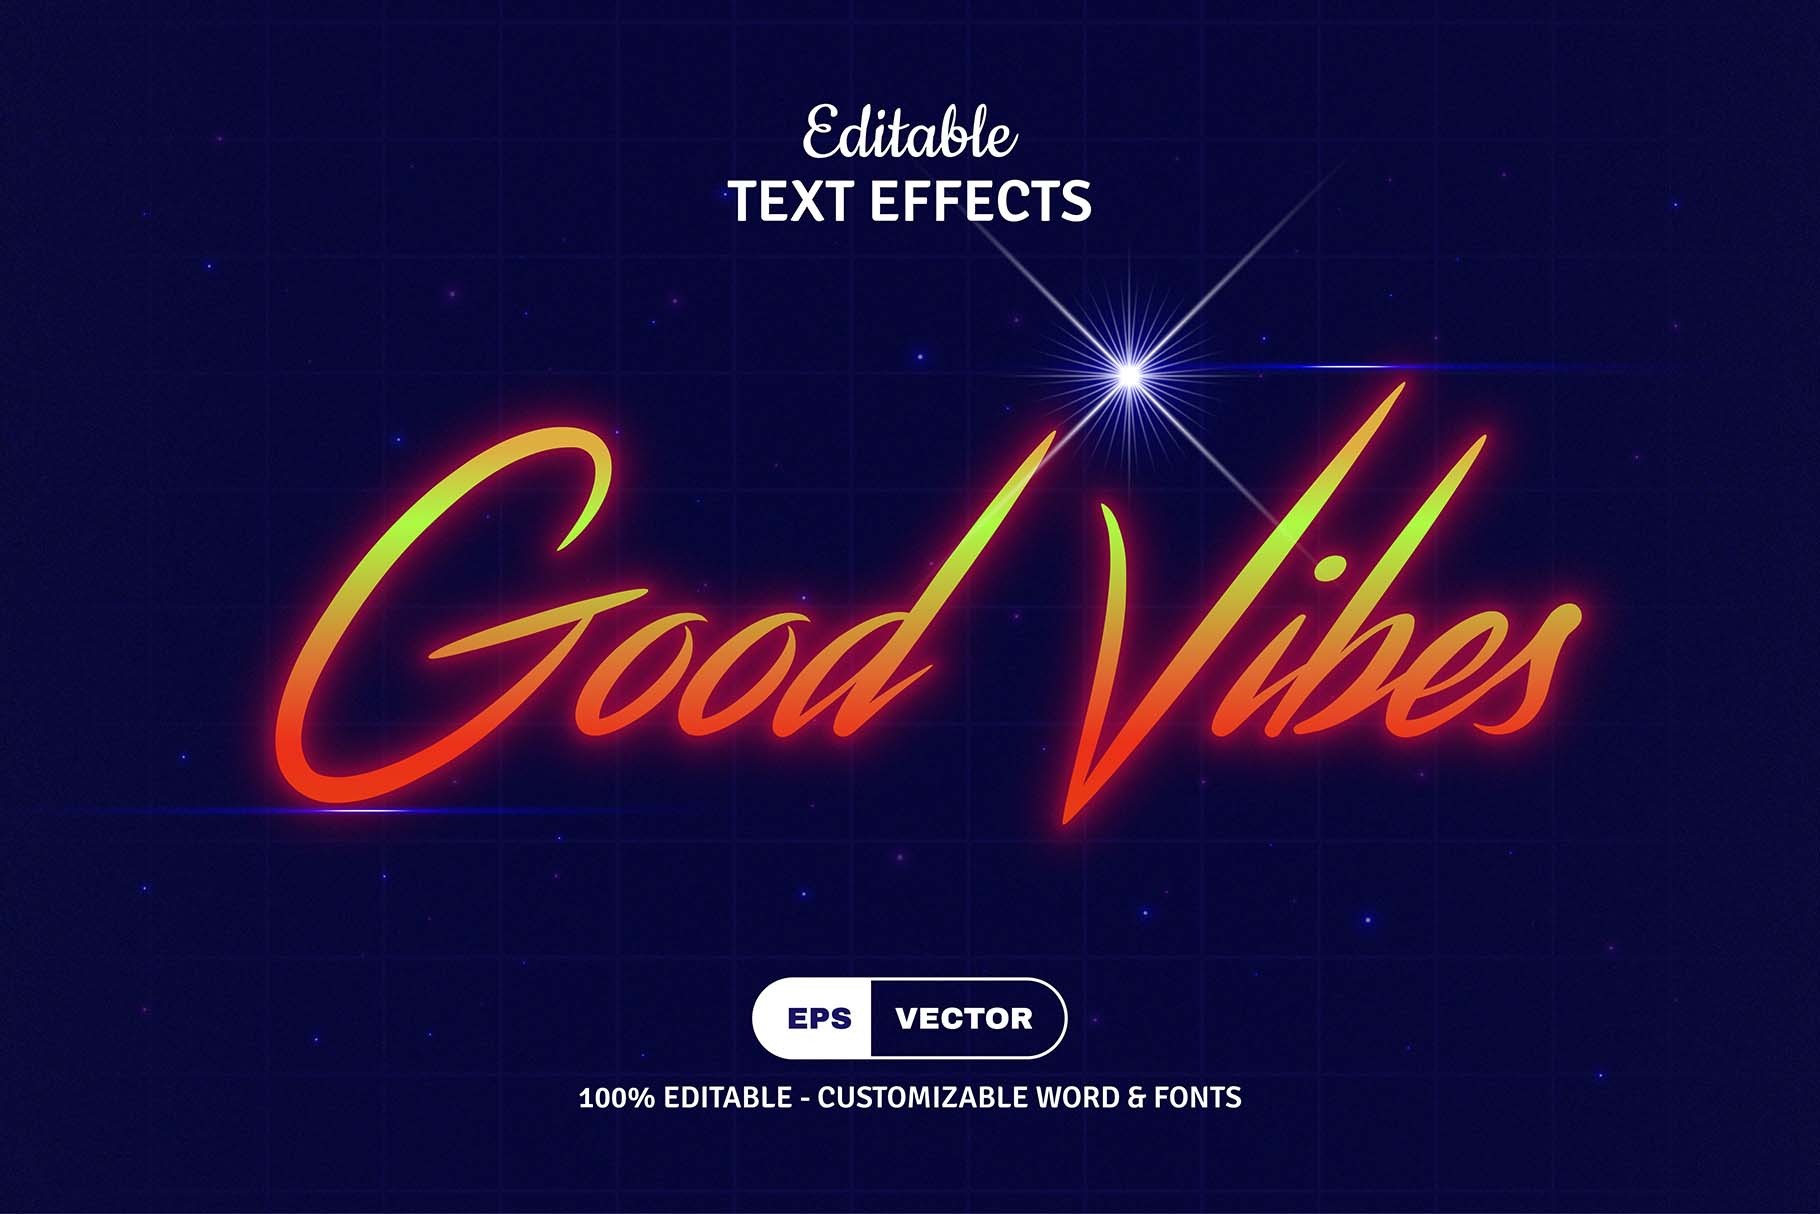 80s text effects 11 452